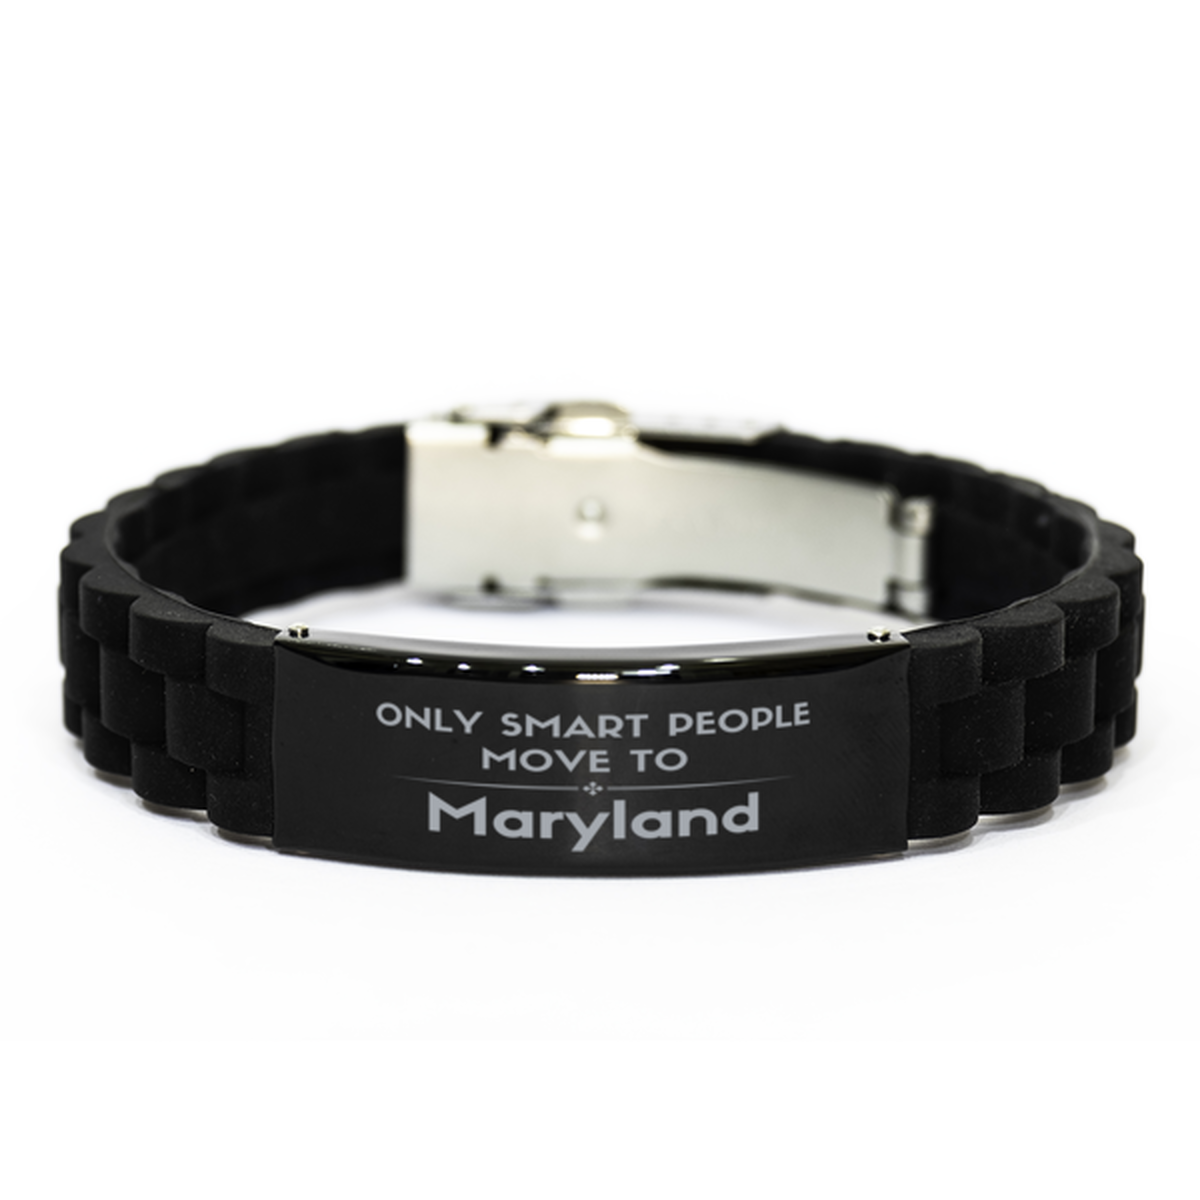 Only smart people move to Maryland Black Glidelock Clasp Bracelet, Gag Gifts For Maryland, Move to Maryland Gifts for Friends Coworker Funny Saying Quote